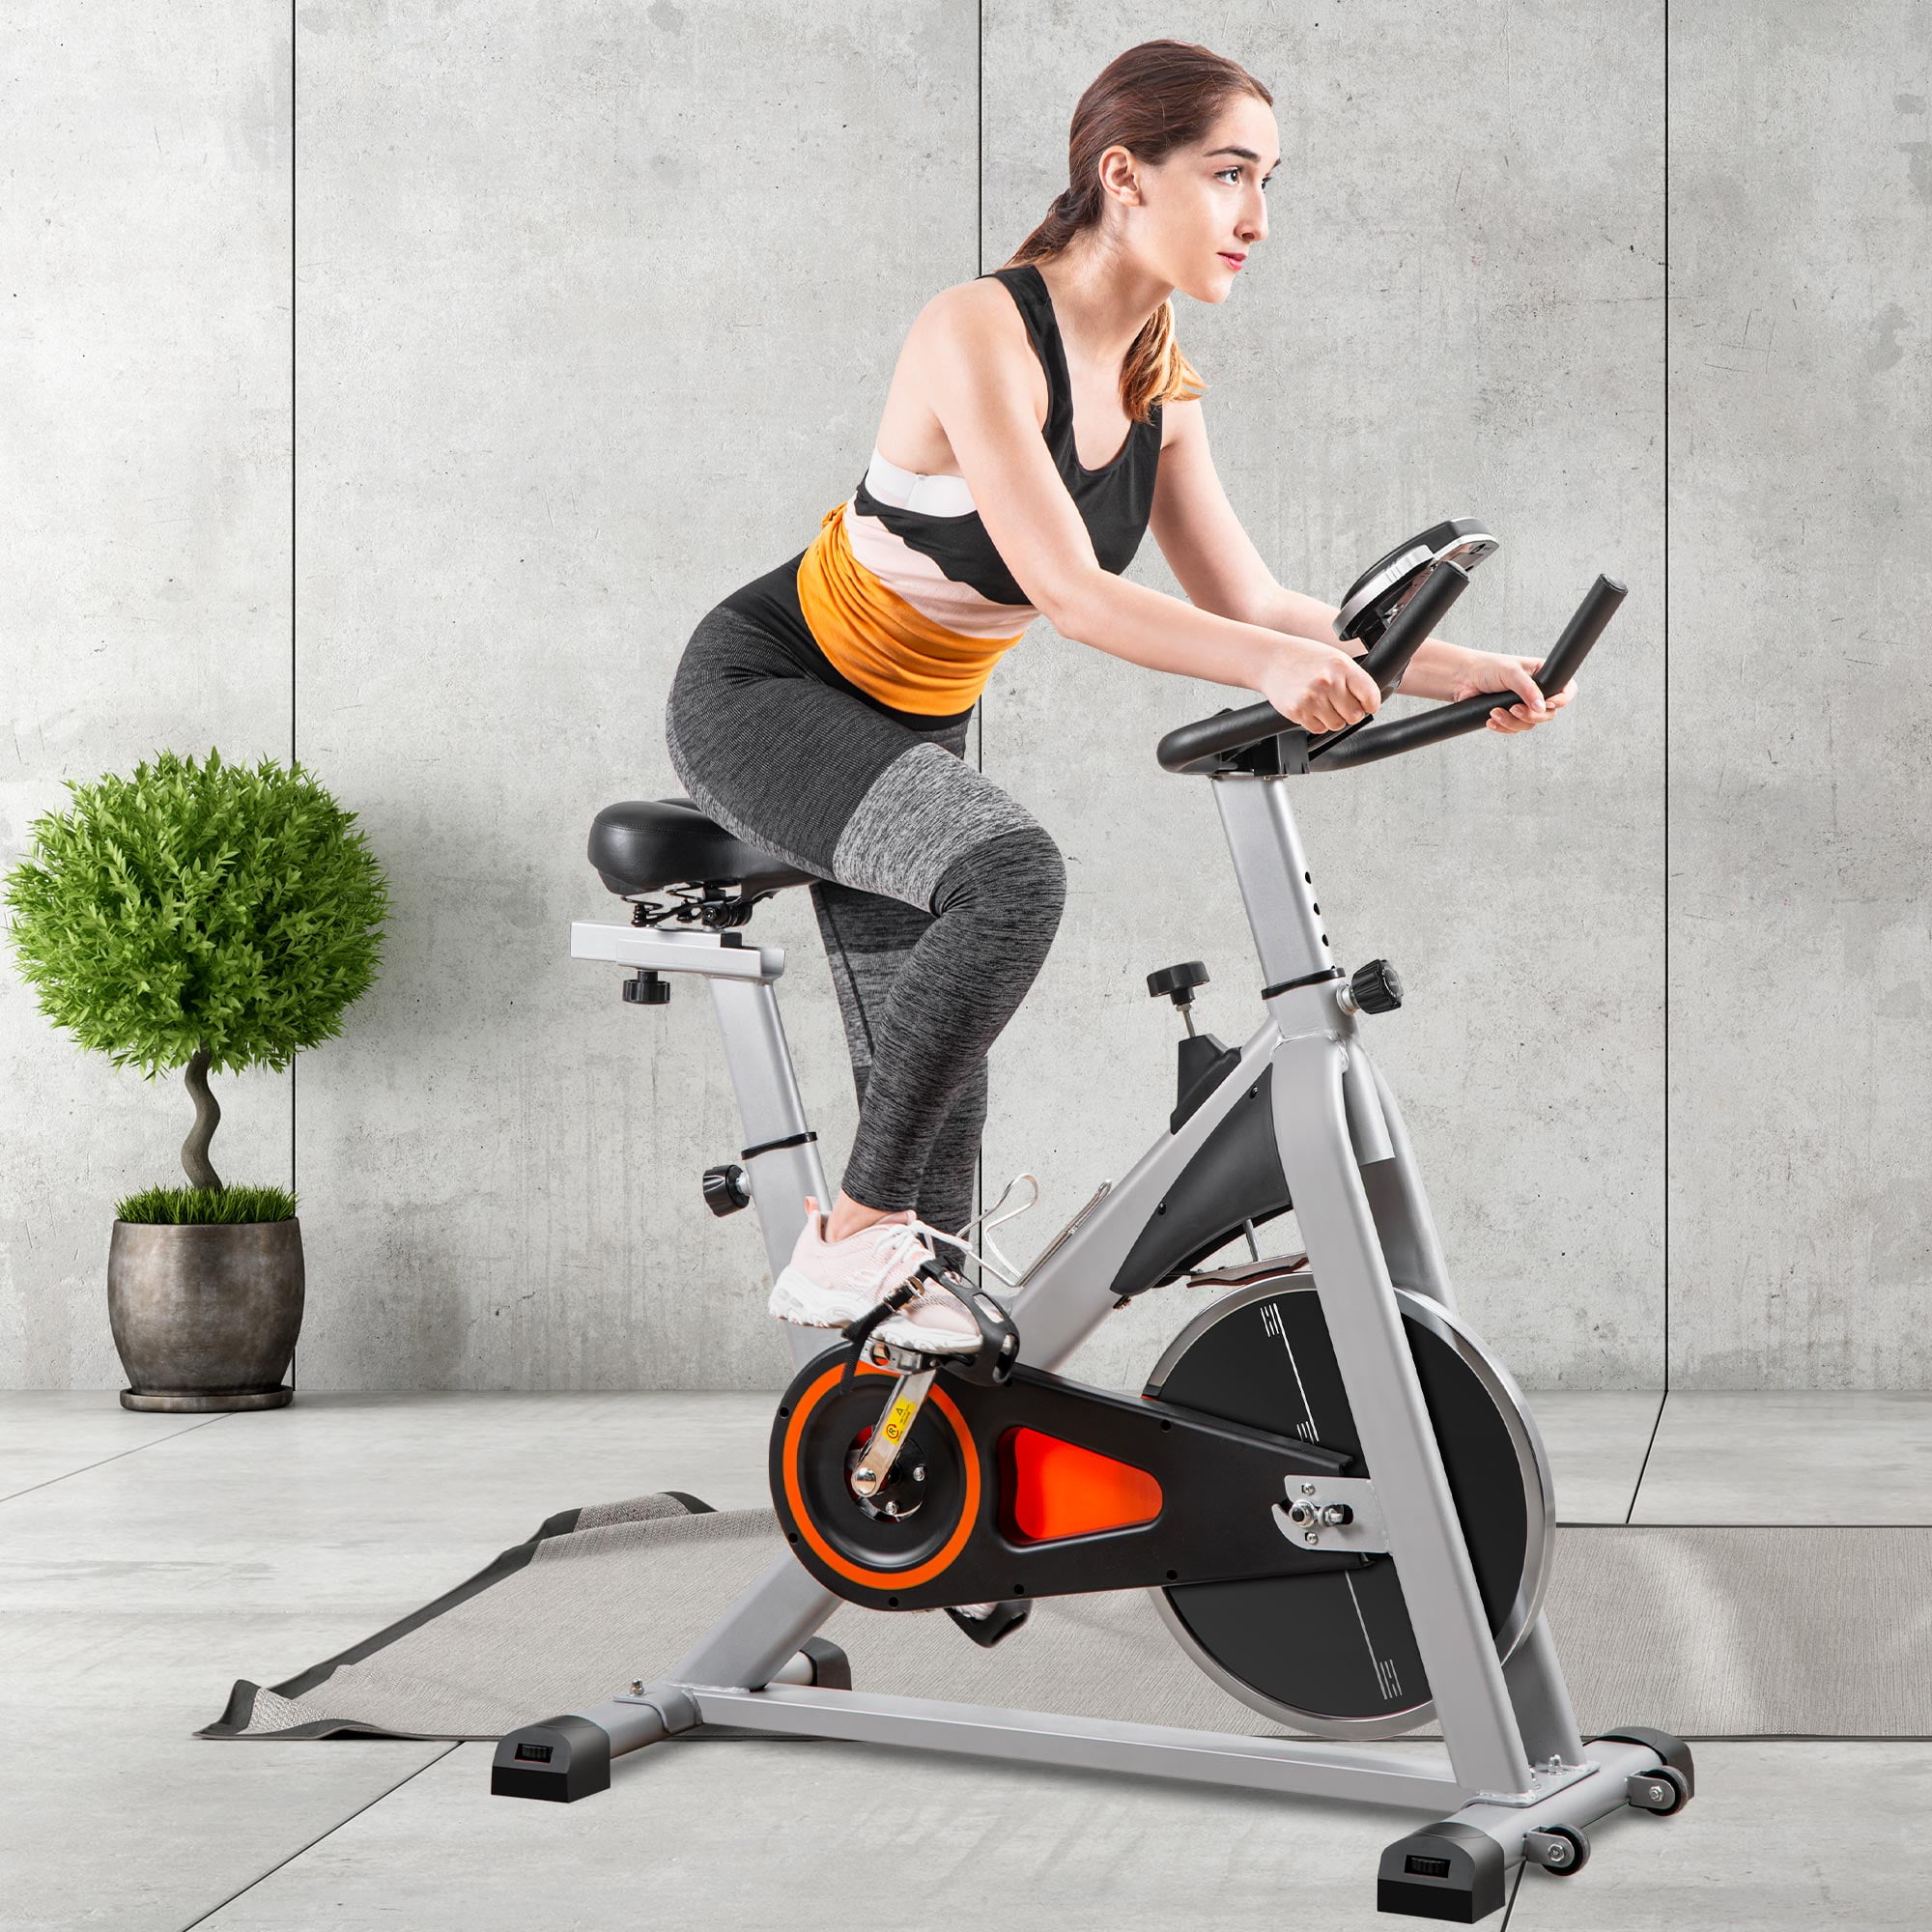 Details about   Indoor Exercise Bike Stationary Bicycle Cardio Fitness Workout Gym & Home 